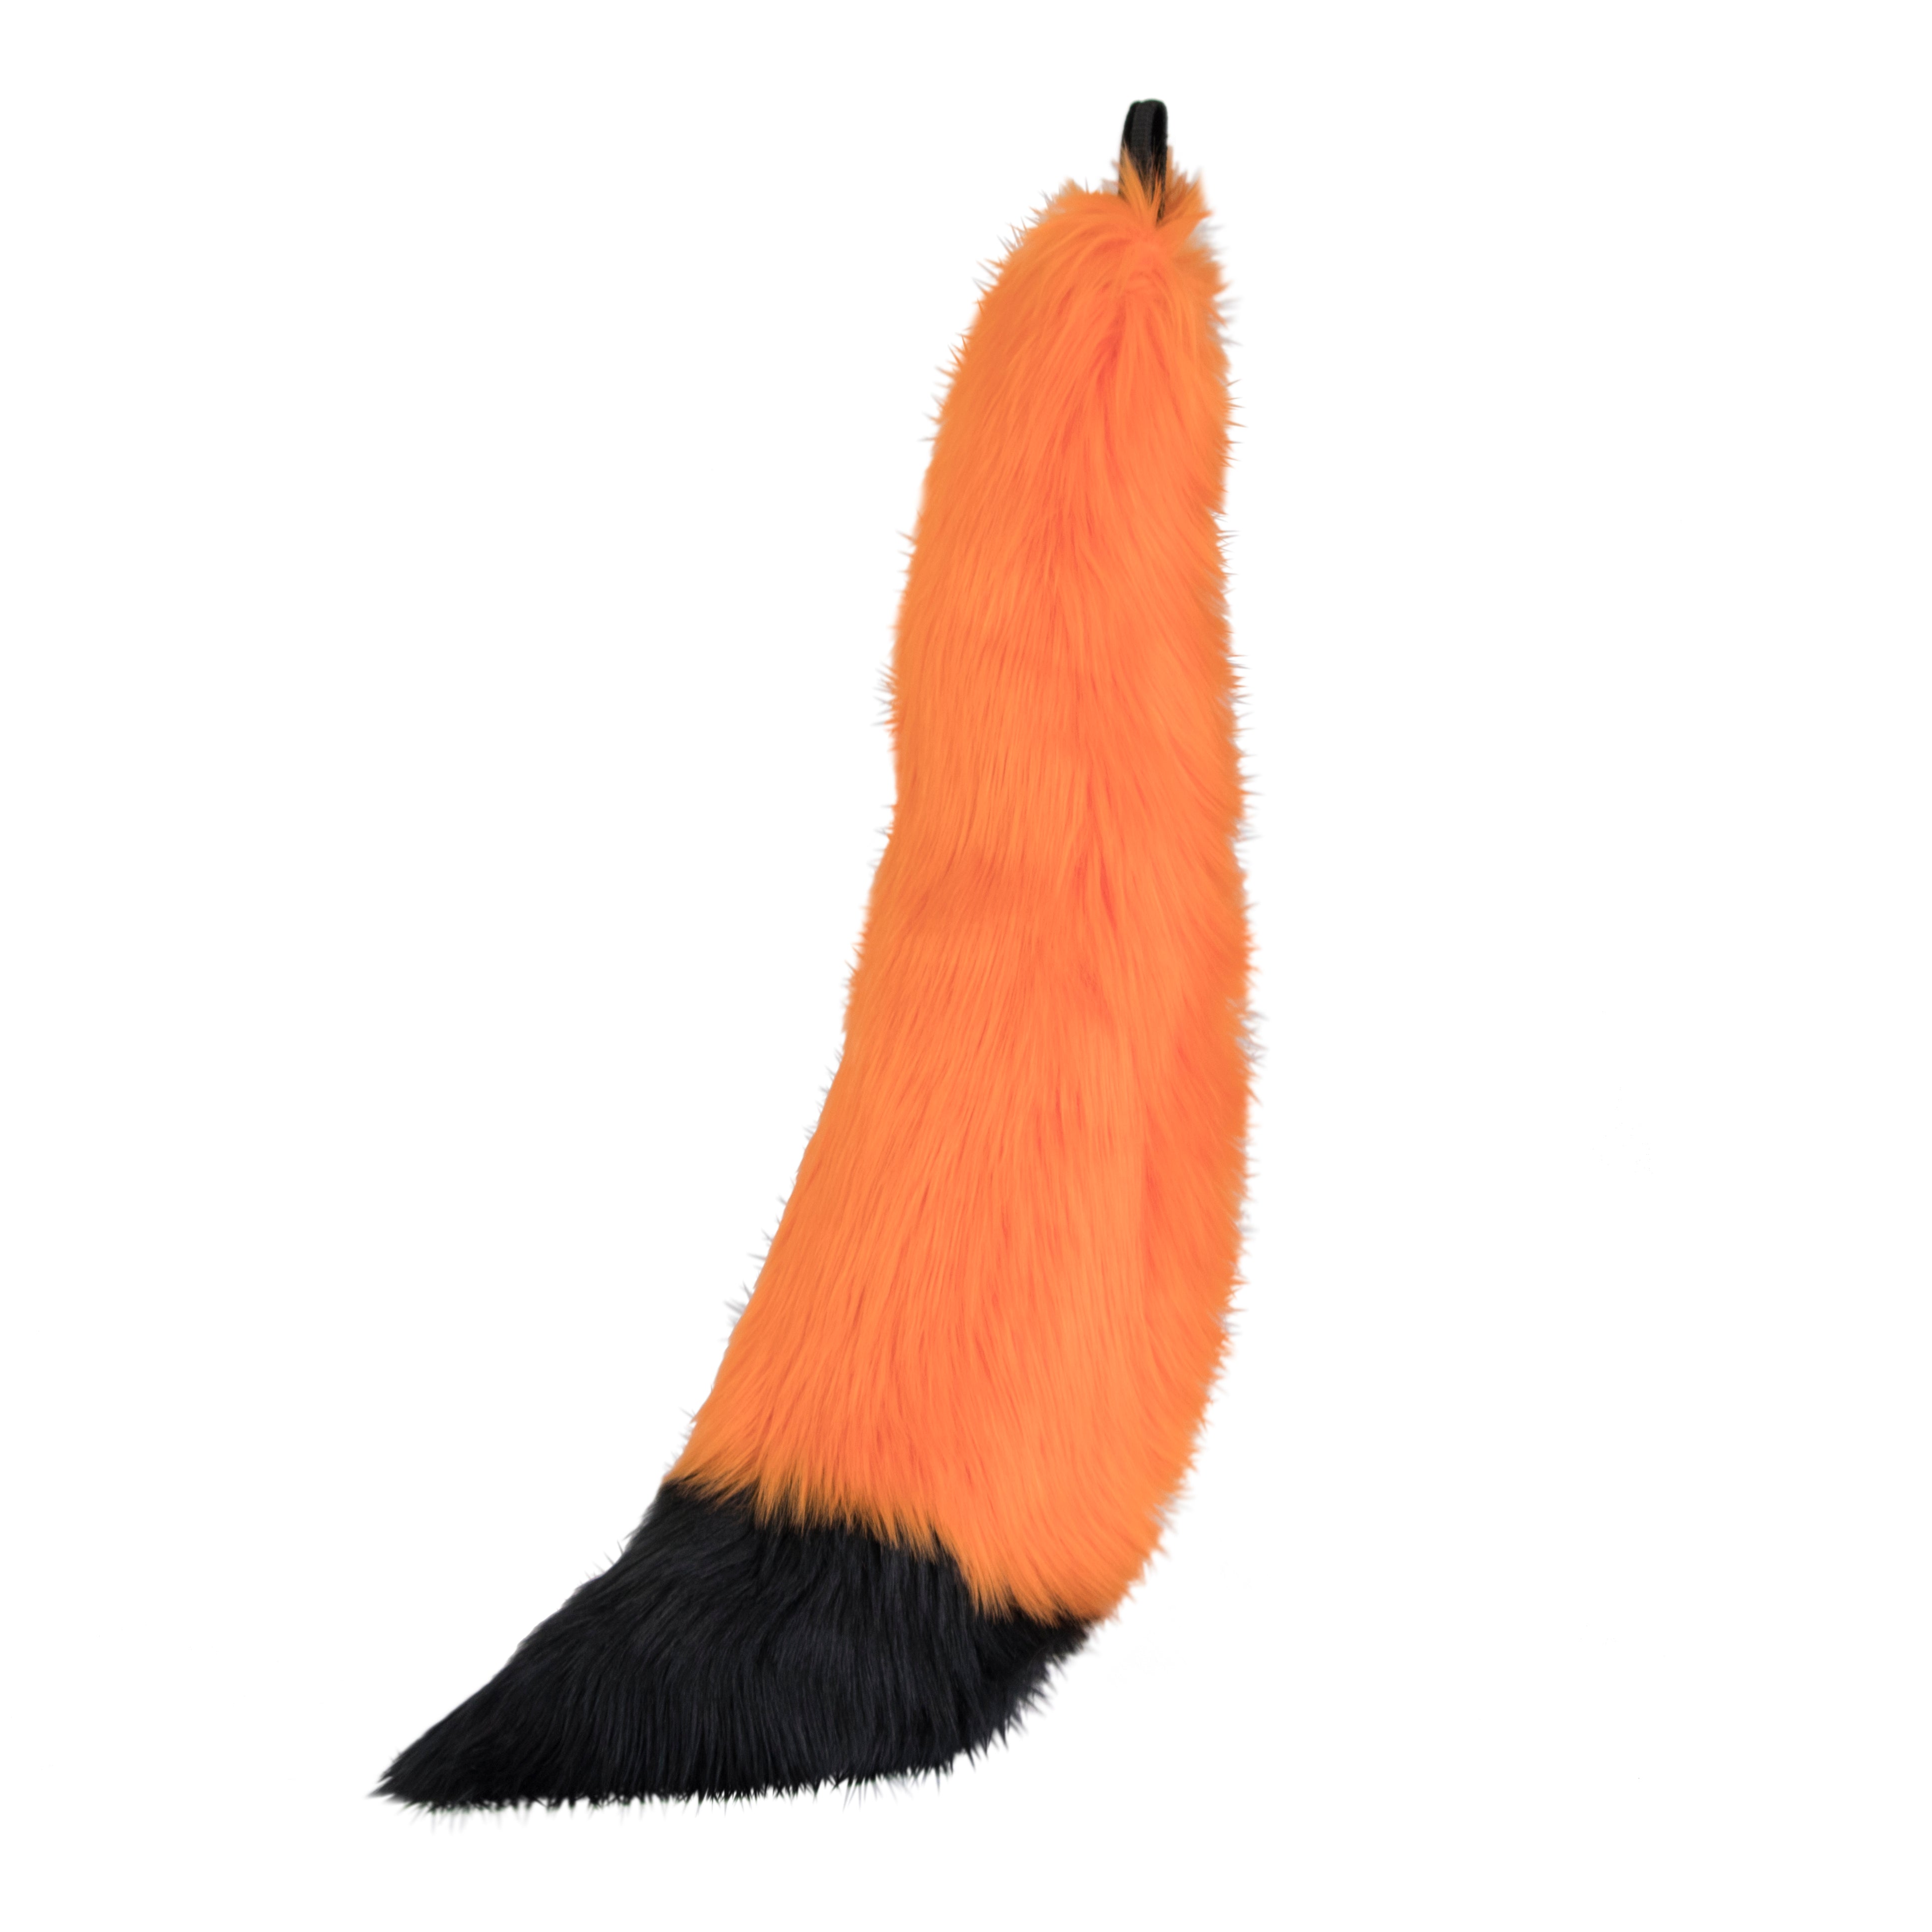 The classic original Pawstar Full Fox Tail made in the usa. Perfect for a partial fursuit, Halloween costume, cosplay or animal festivals!